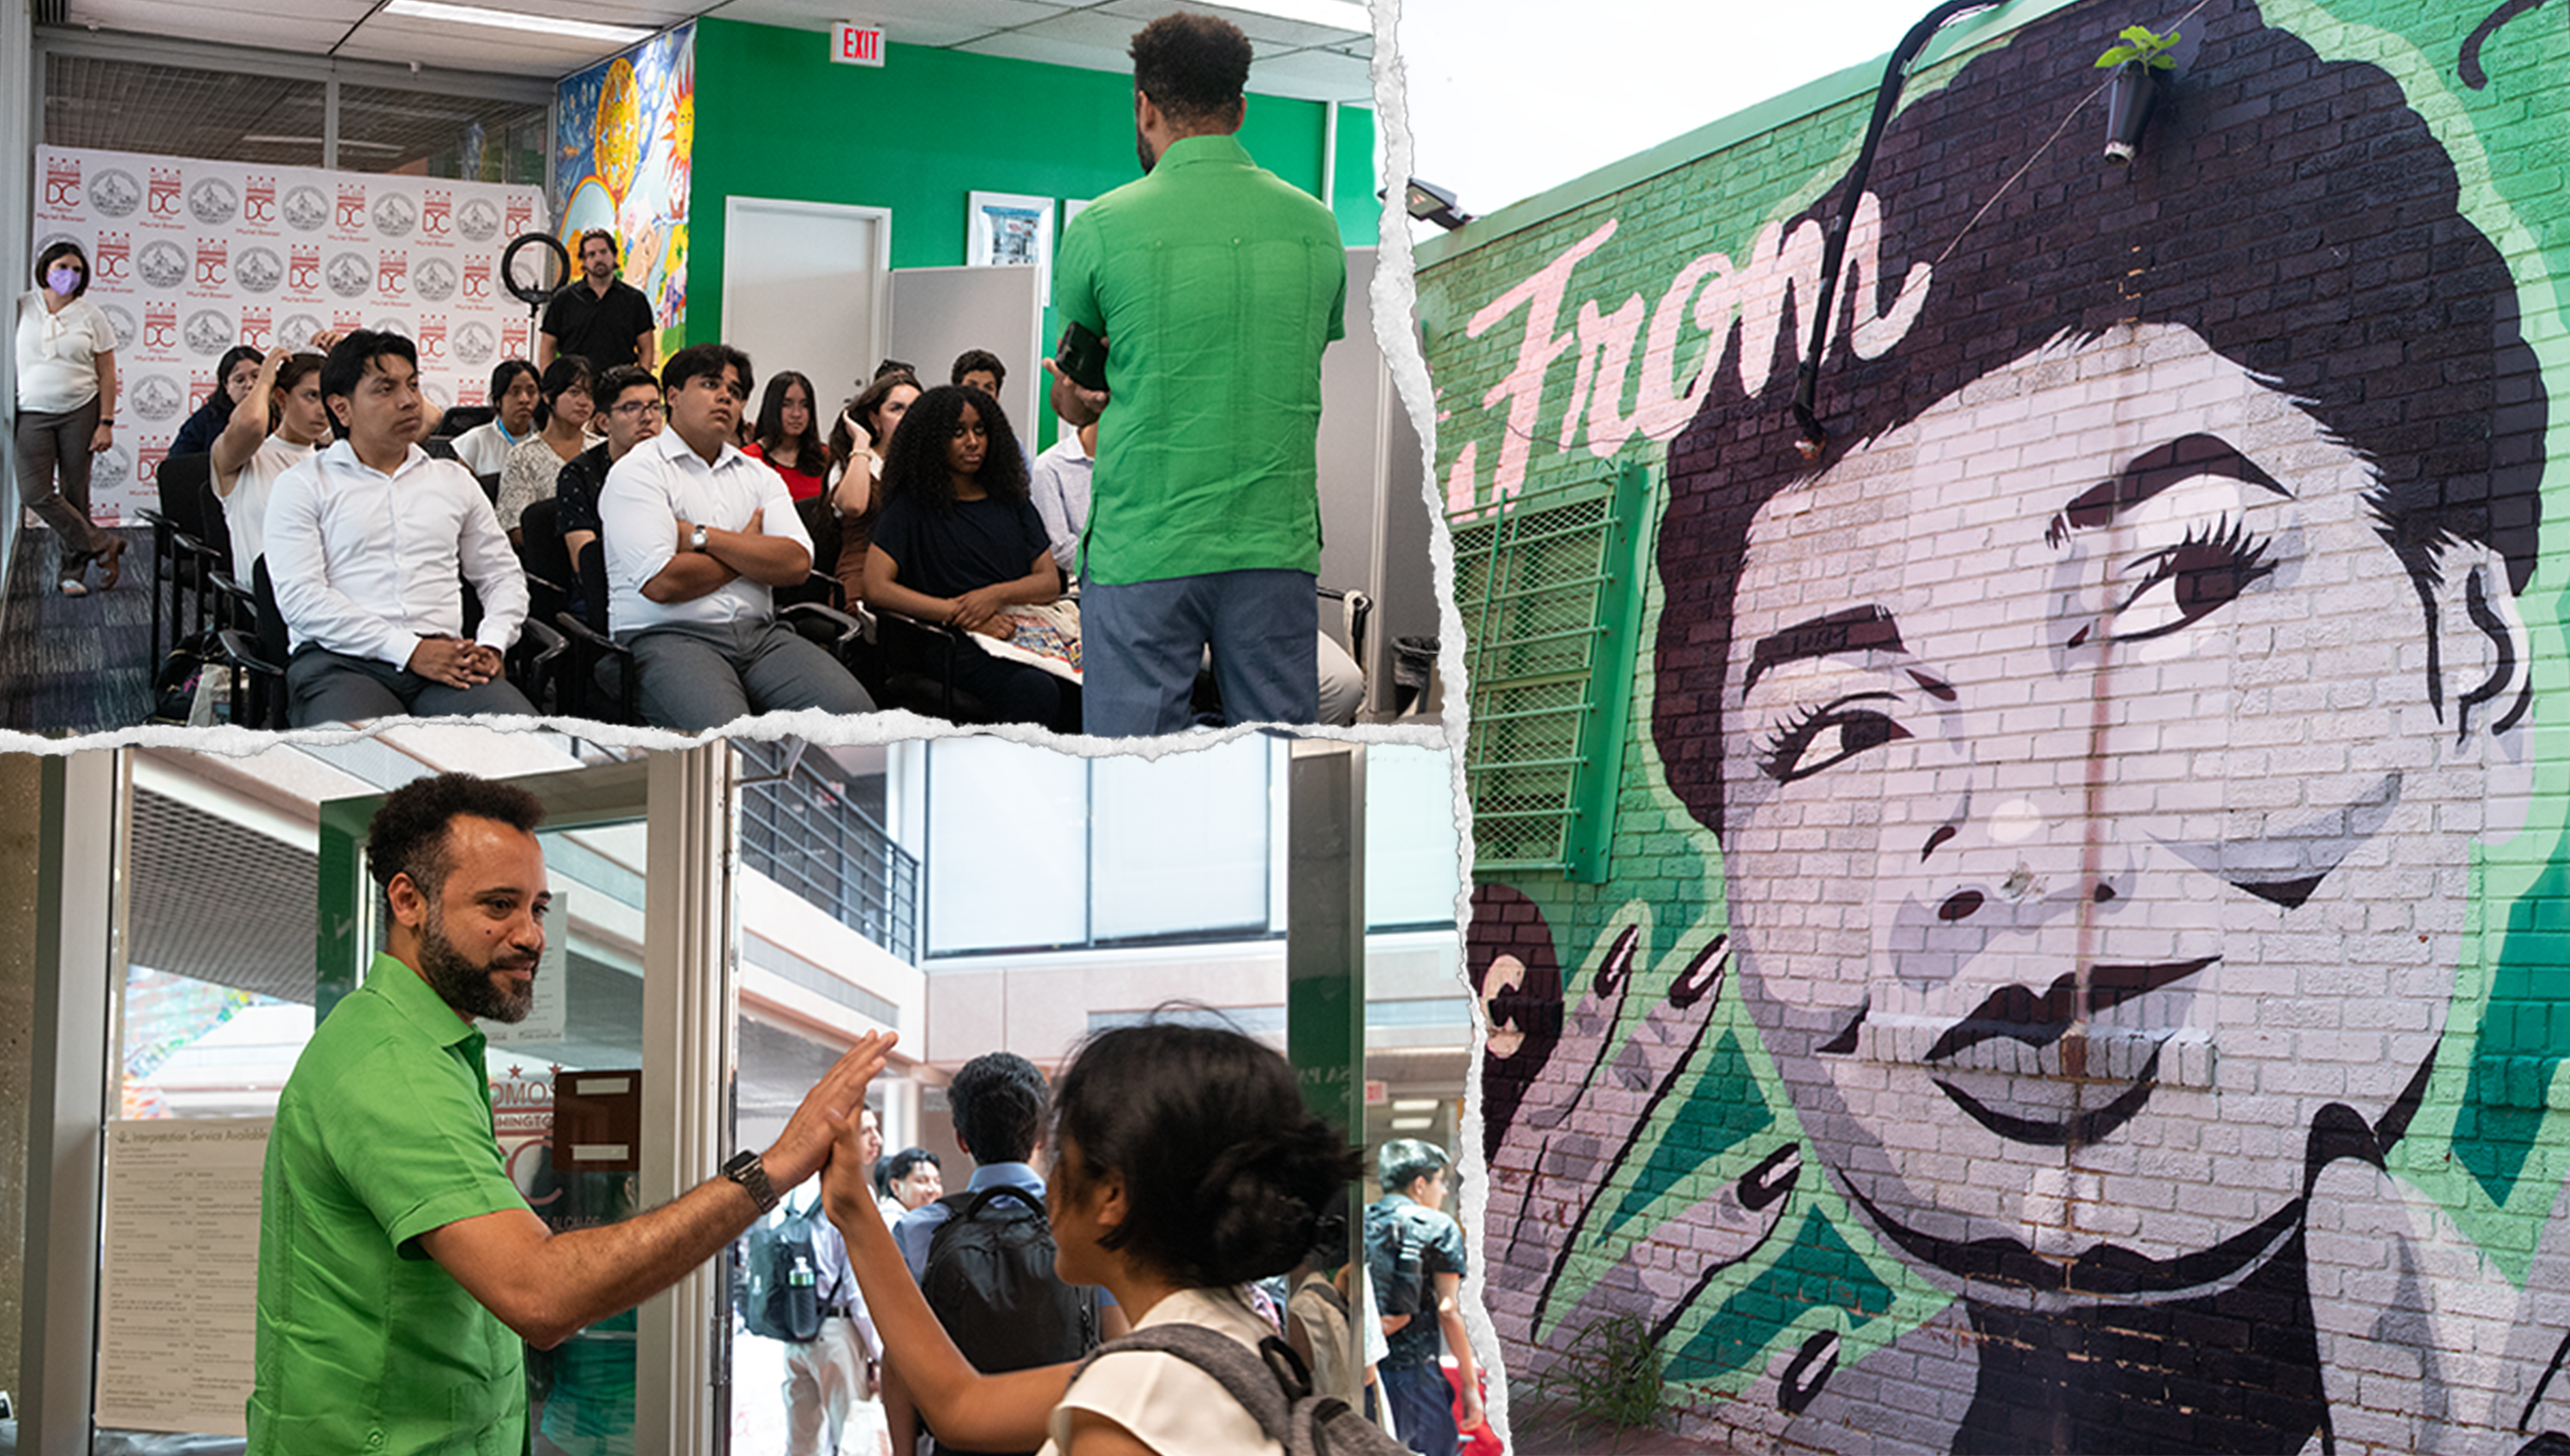 Top, left: group of students; bottom, left: man giving high five to student; right: mural of a woman